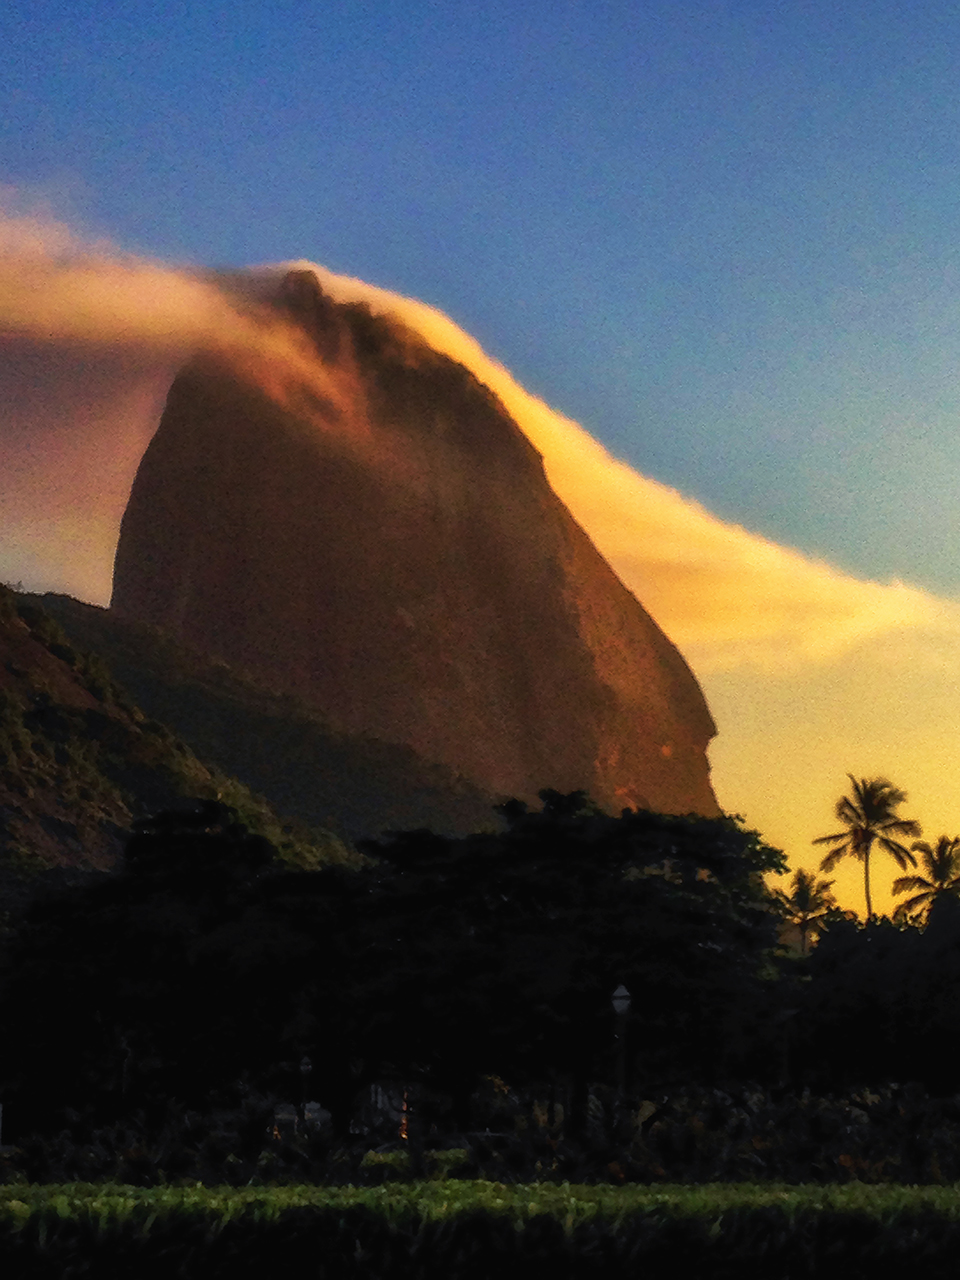 Ethereal clouds at sunrise race over the famed Sugarloaf at Rio de Janeiro in Brazil